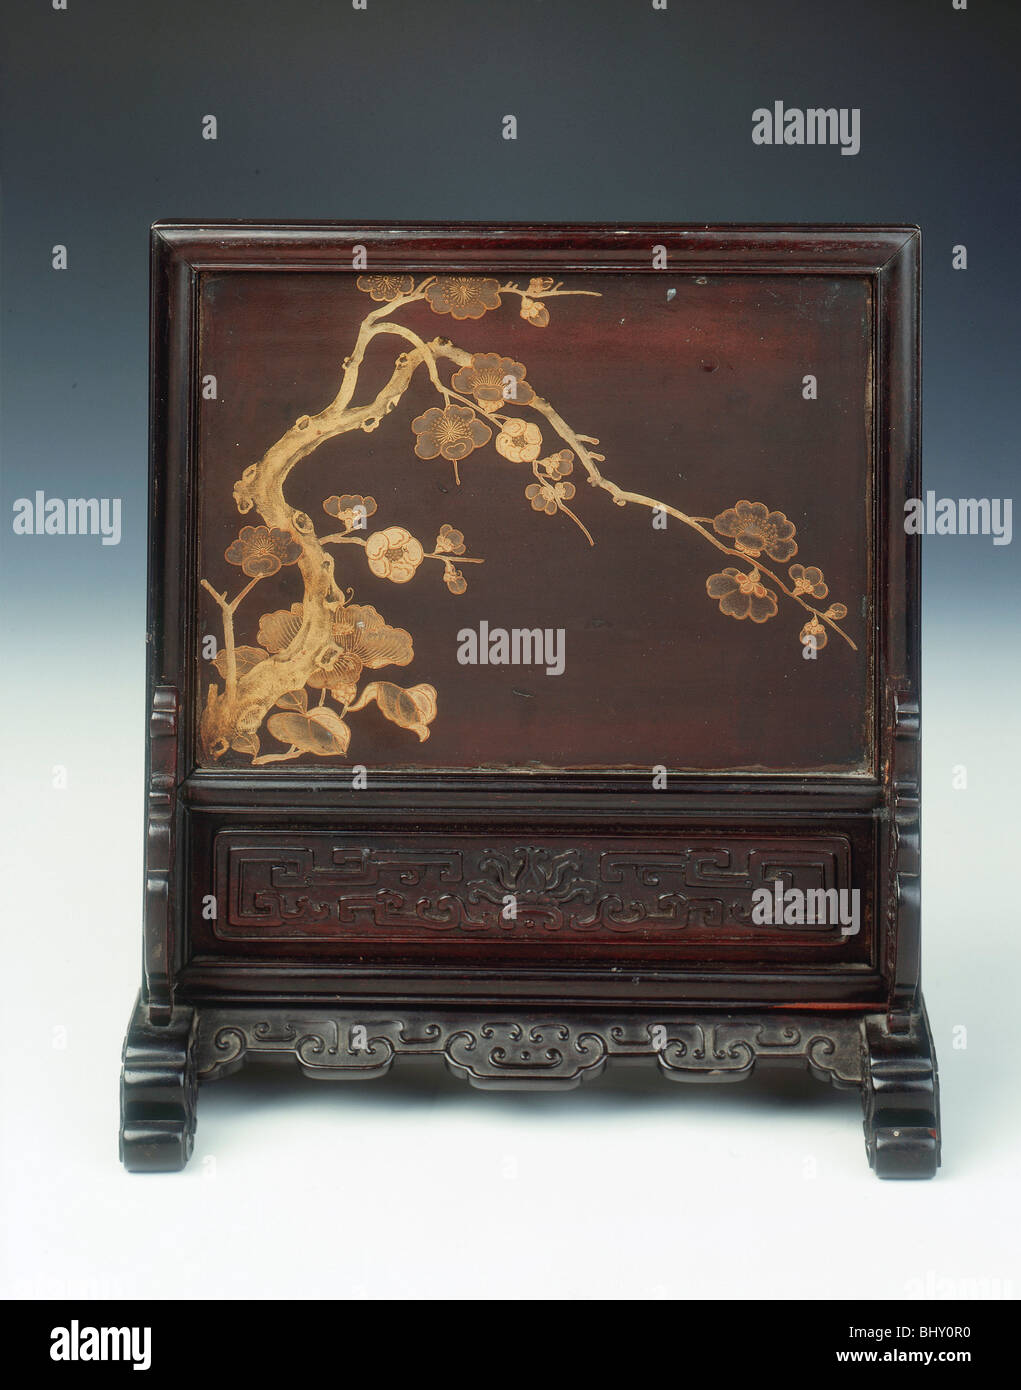 Lacquer plaque in carved wood table screen, Qing dynasty, China, 17th century. Artist: Unknown Stock Photo